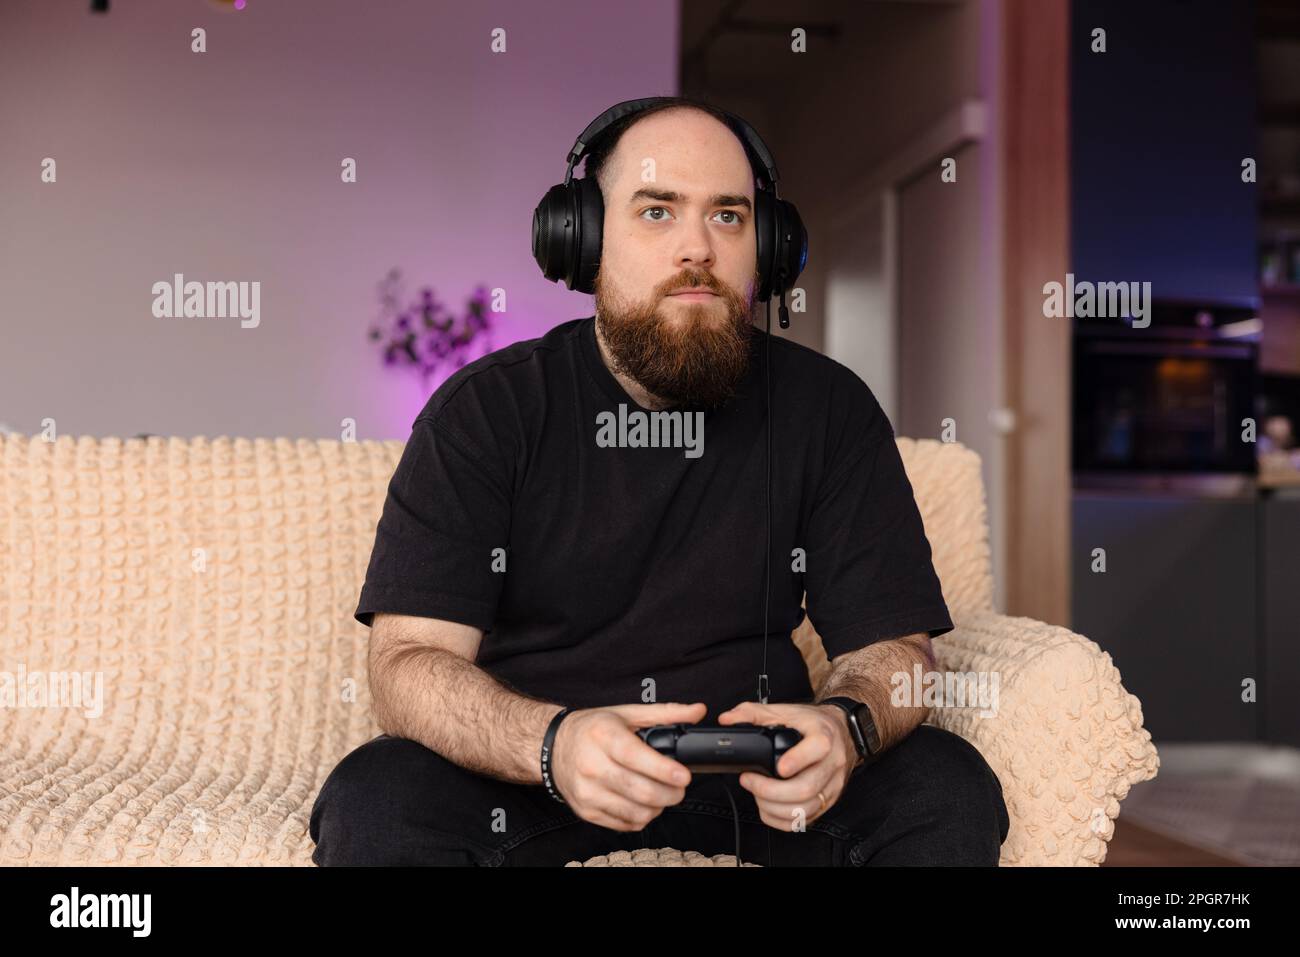 Male gamer playing video games with the controller in his hands. and his headsets on. Face expression of a gamer. Stock Photo